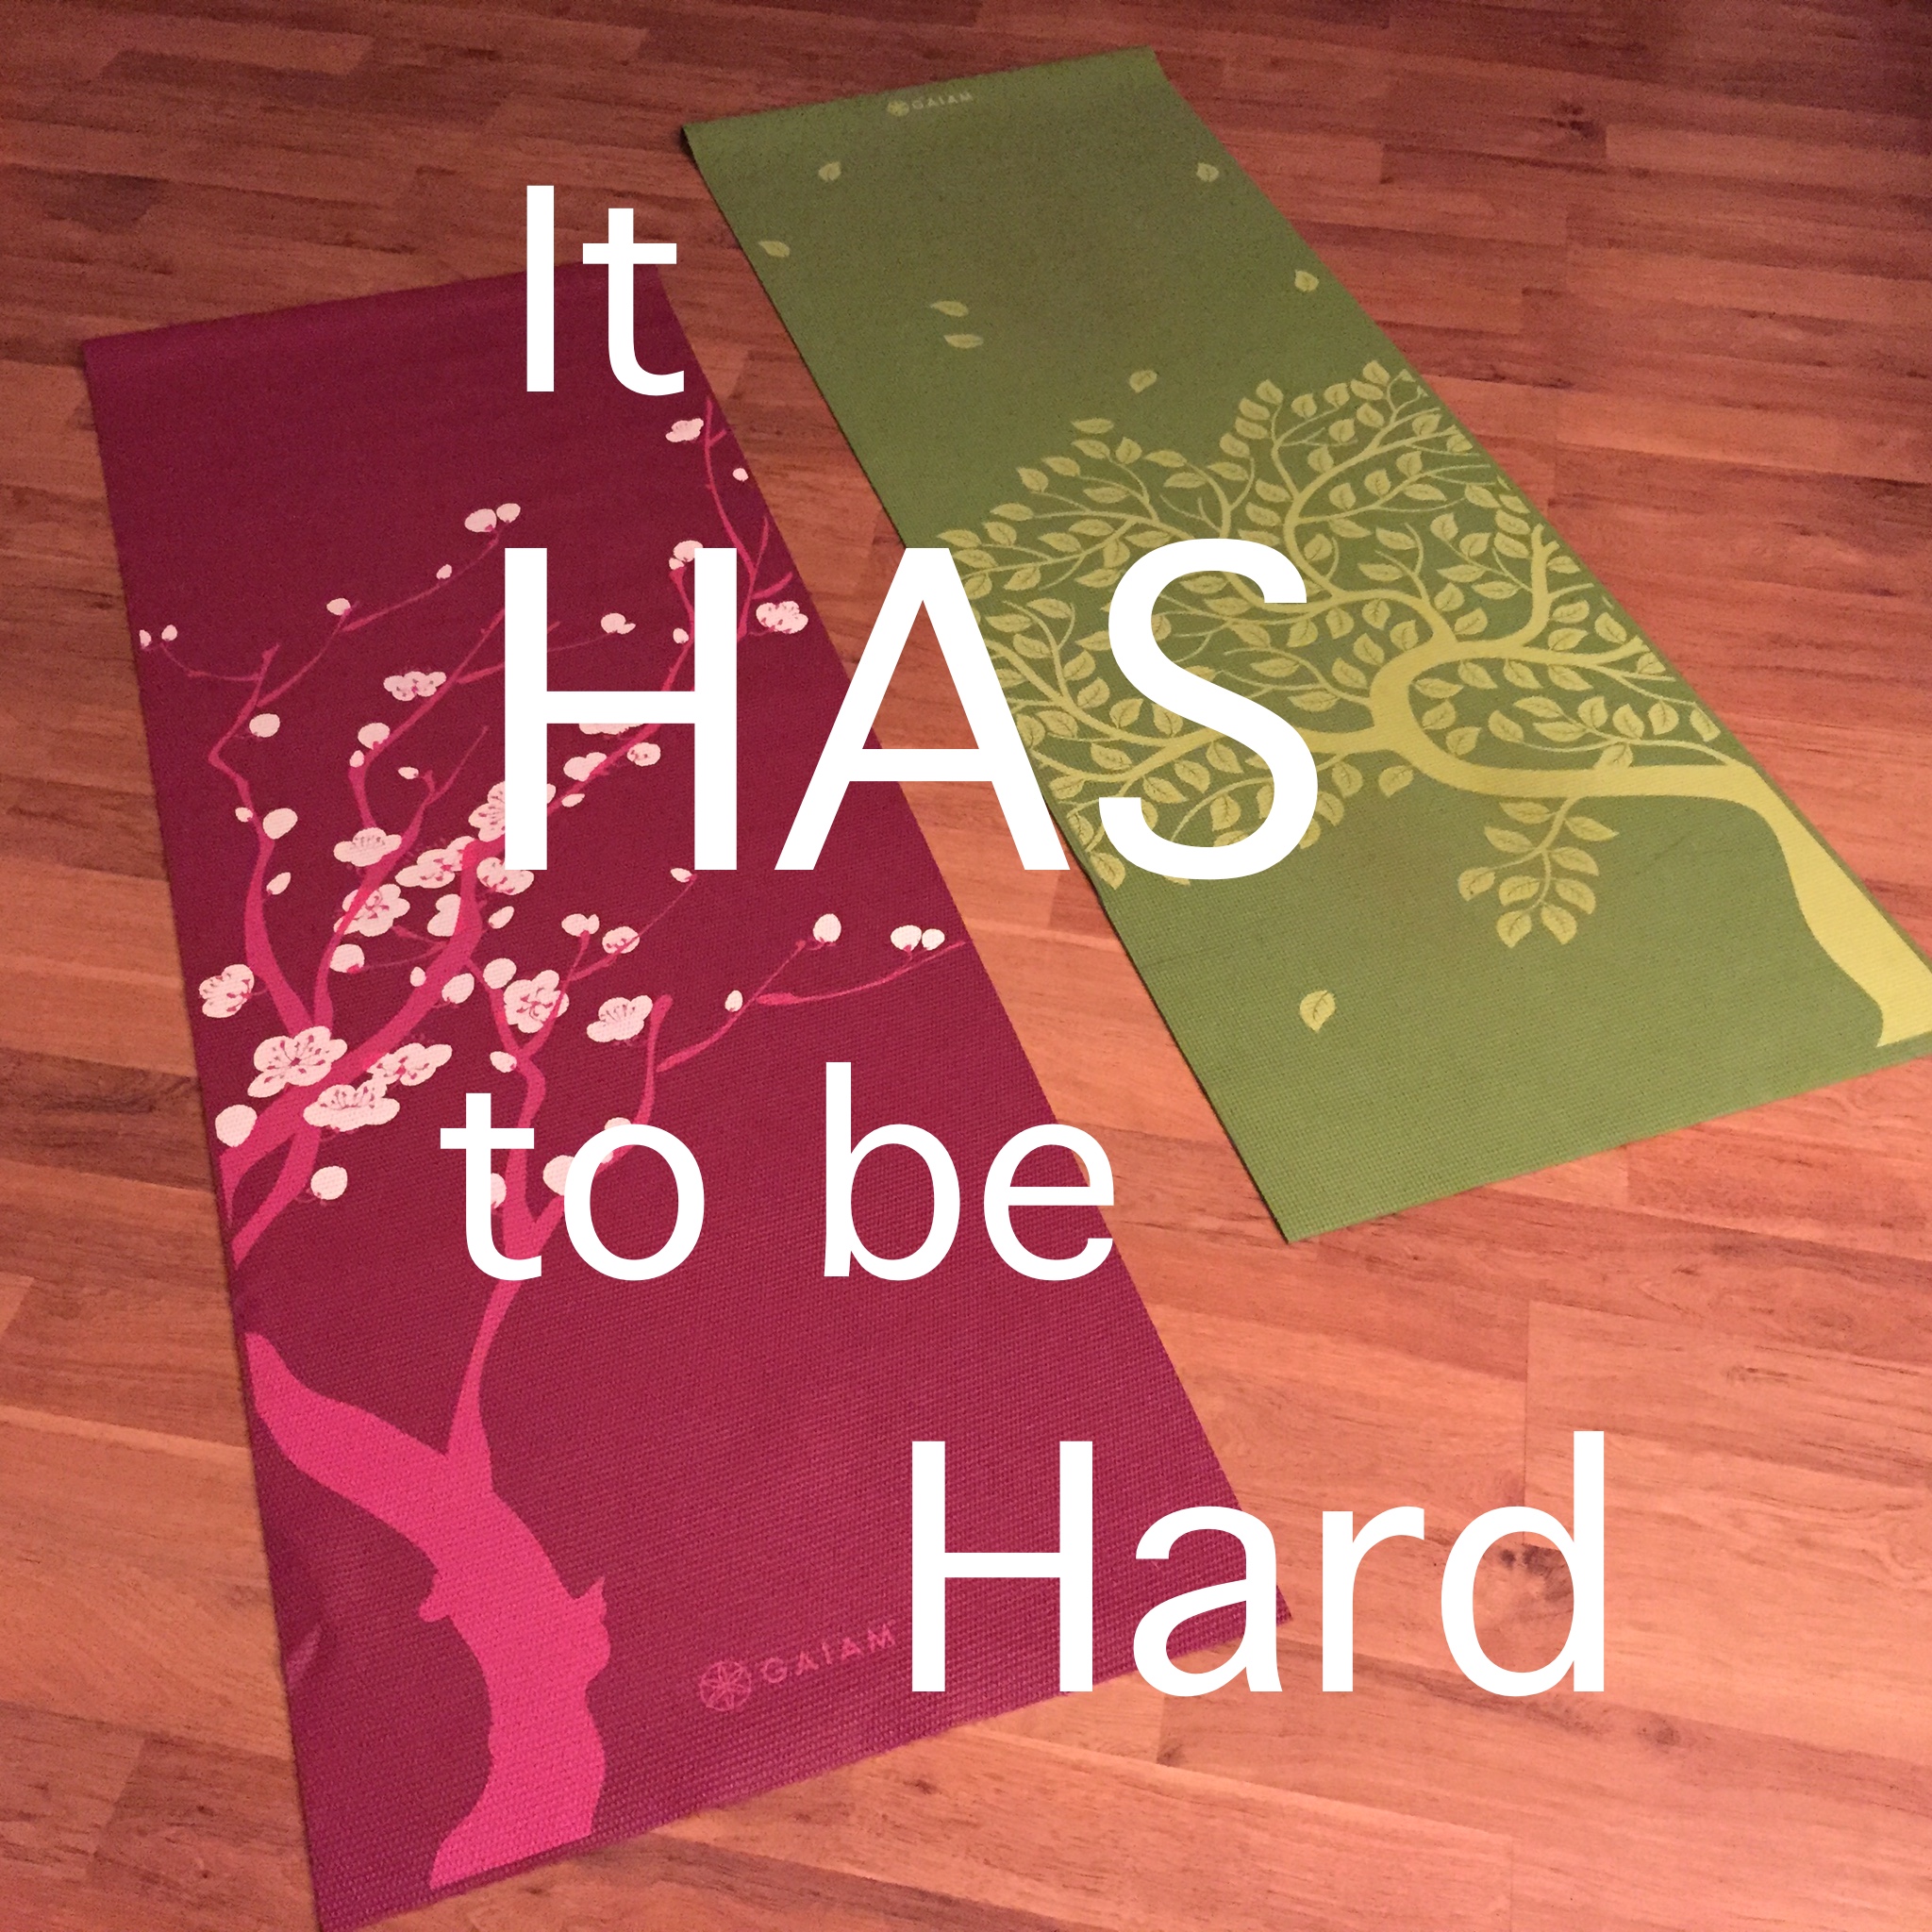 two yoga mats on wood floor; text overlay "It has to be hard"